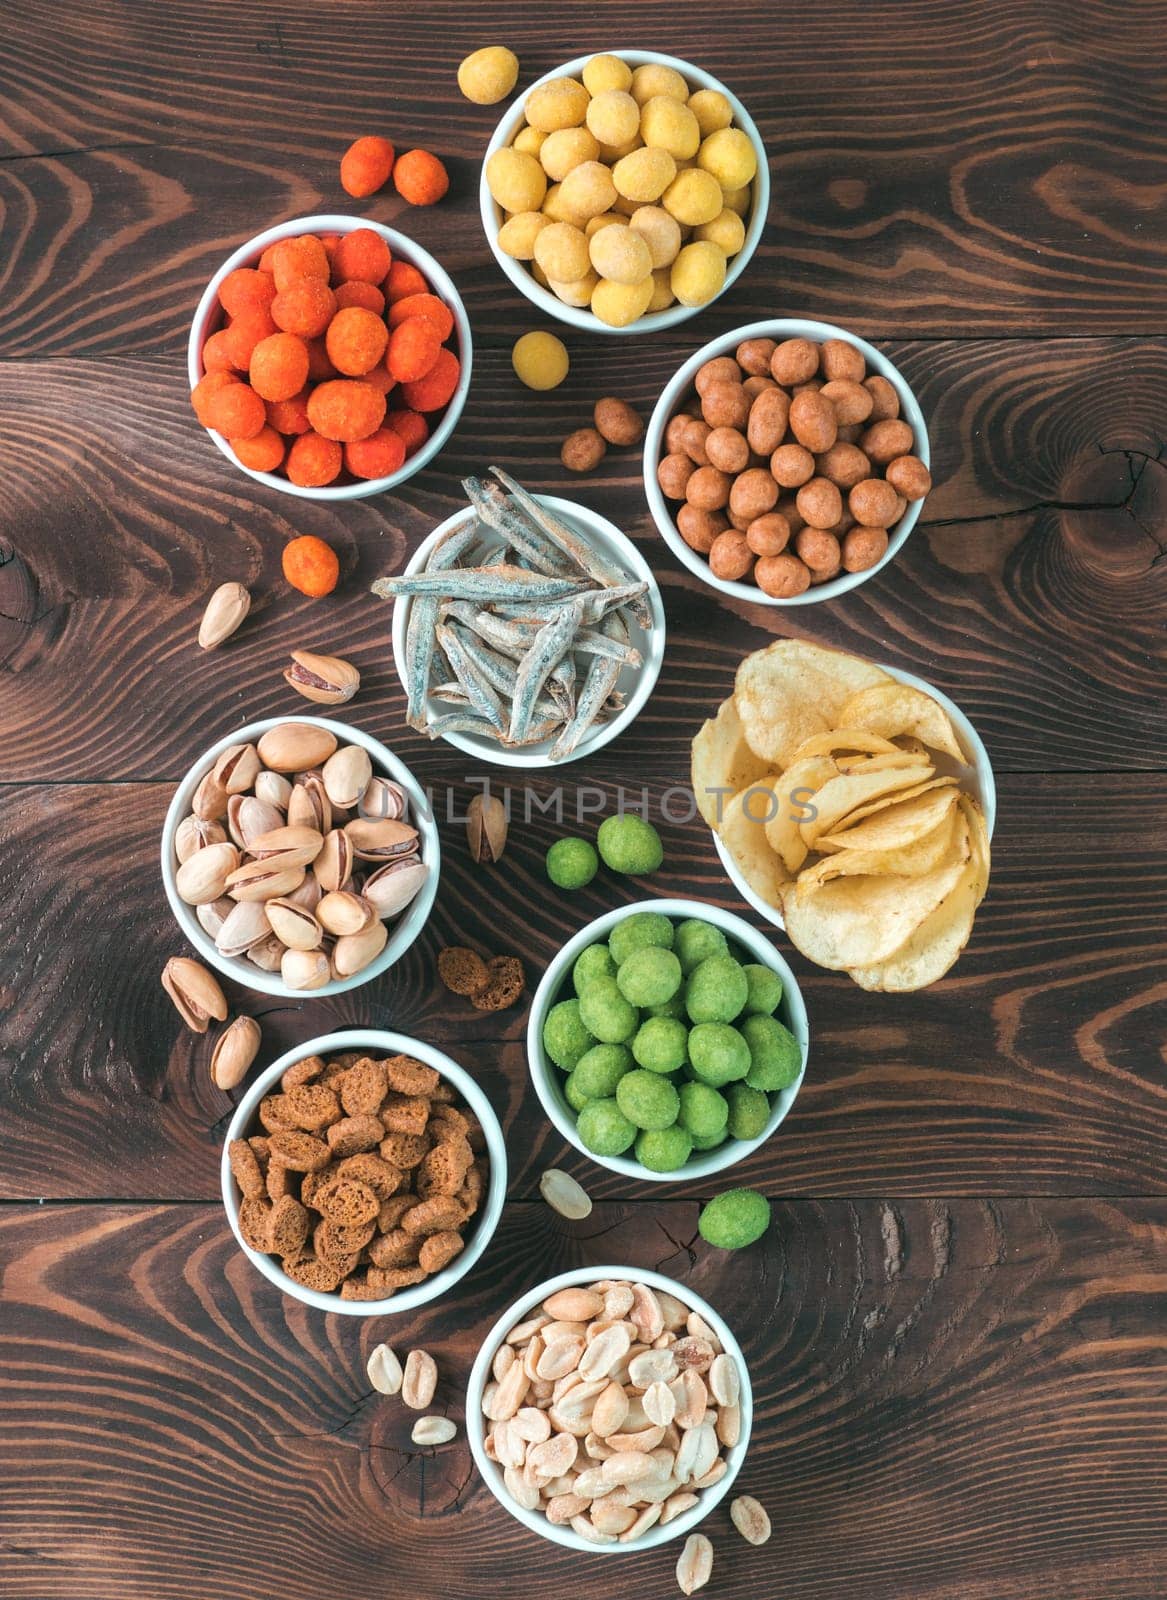 Assortment of different snack for beer, wine, party. Peanuts in coconut glaze, green vasabi, red spicy chilli, yellow cheese glaze, chips, pistachio, crackers, fish on brown wooden table. Copy space